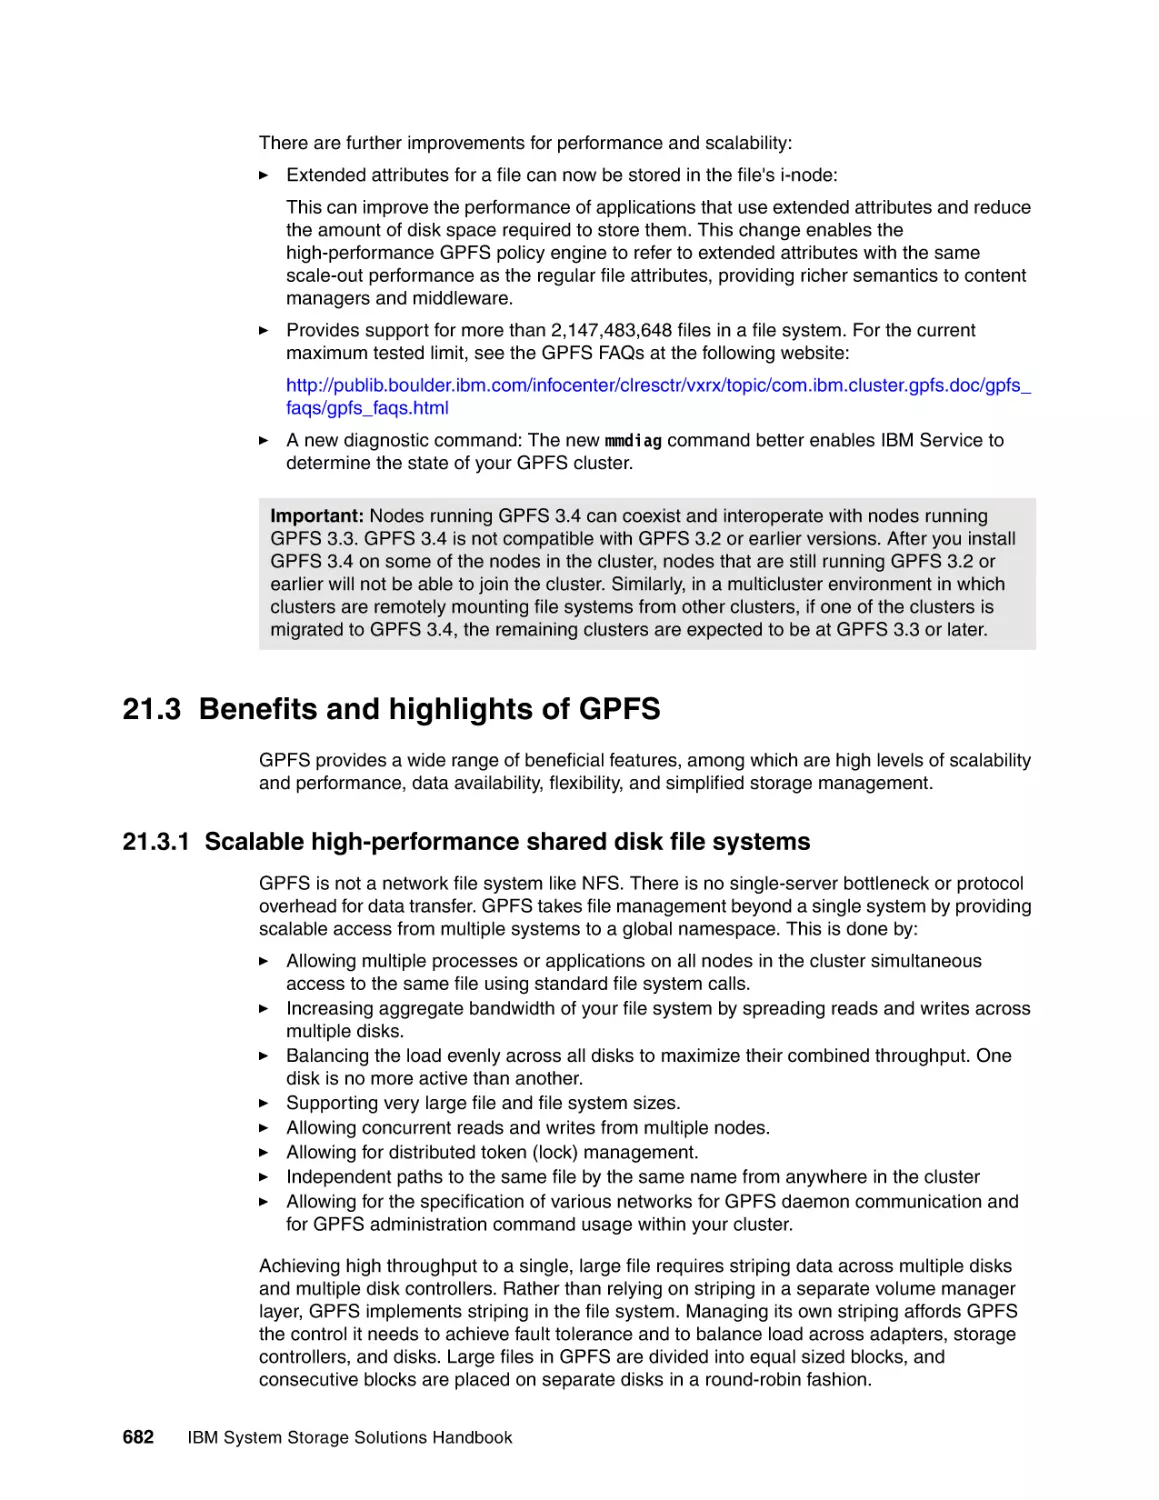 21.3 Benefits and highlights of GPFS
21.3.1 Scalable high-performance shared disk file systems